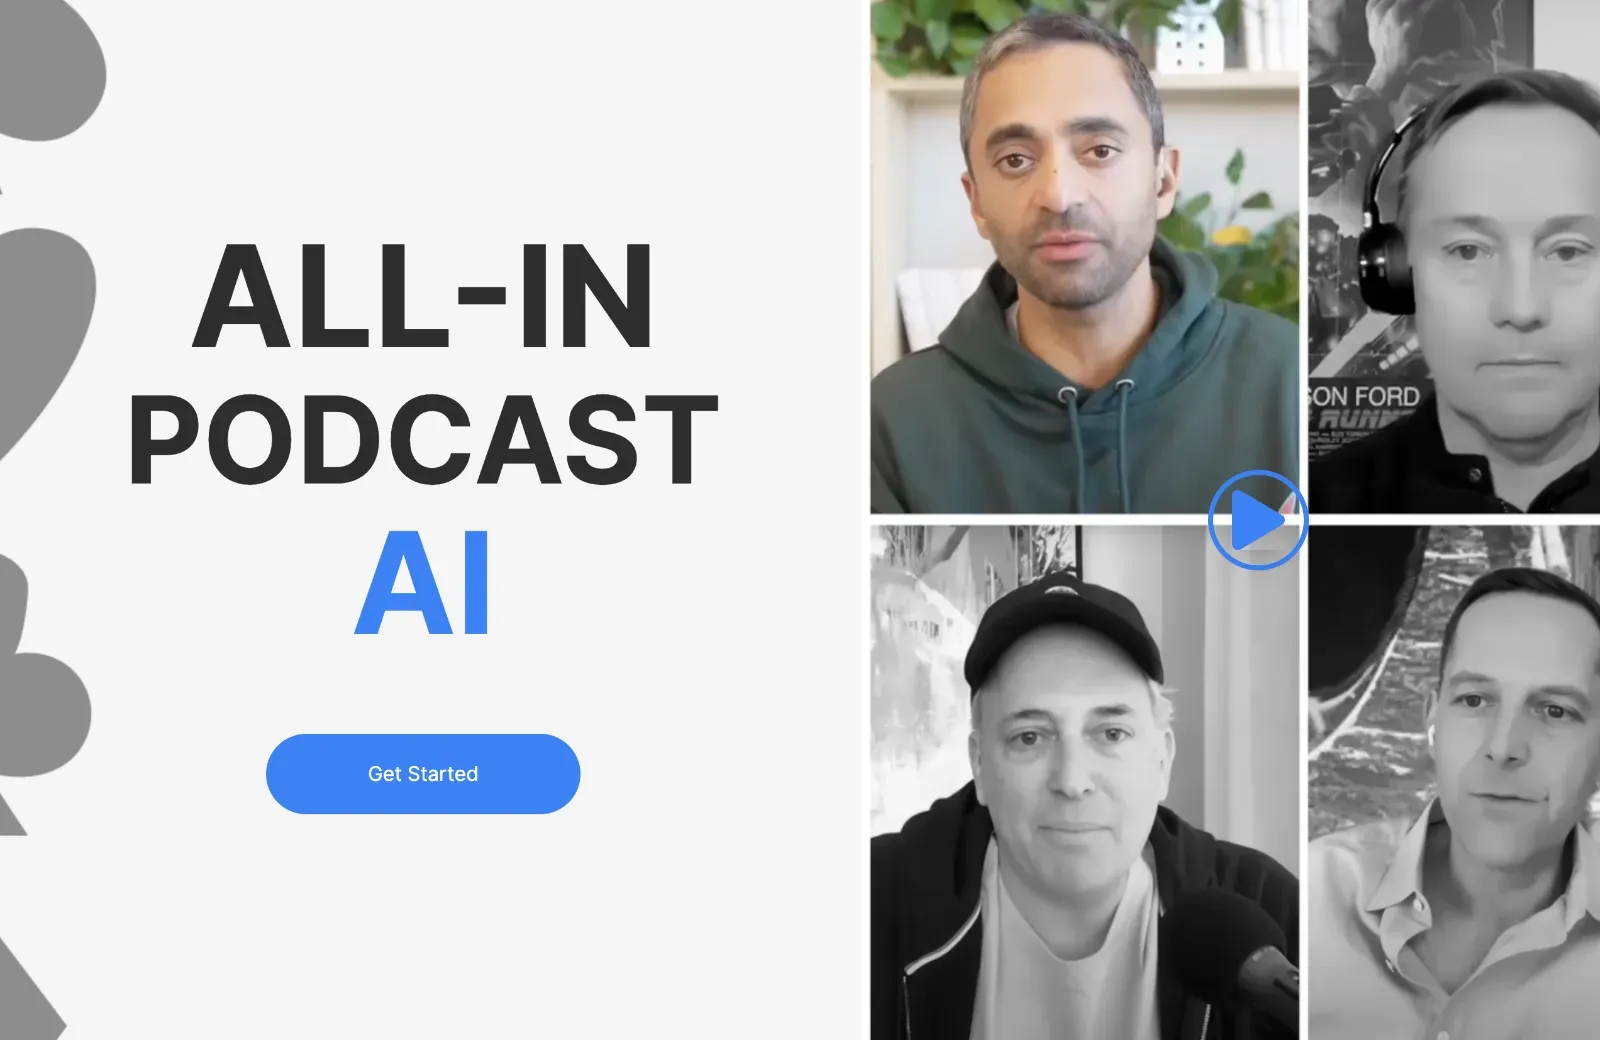 All-in Podcast